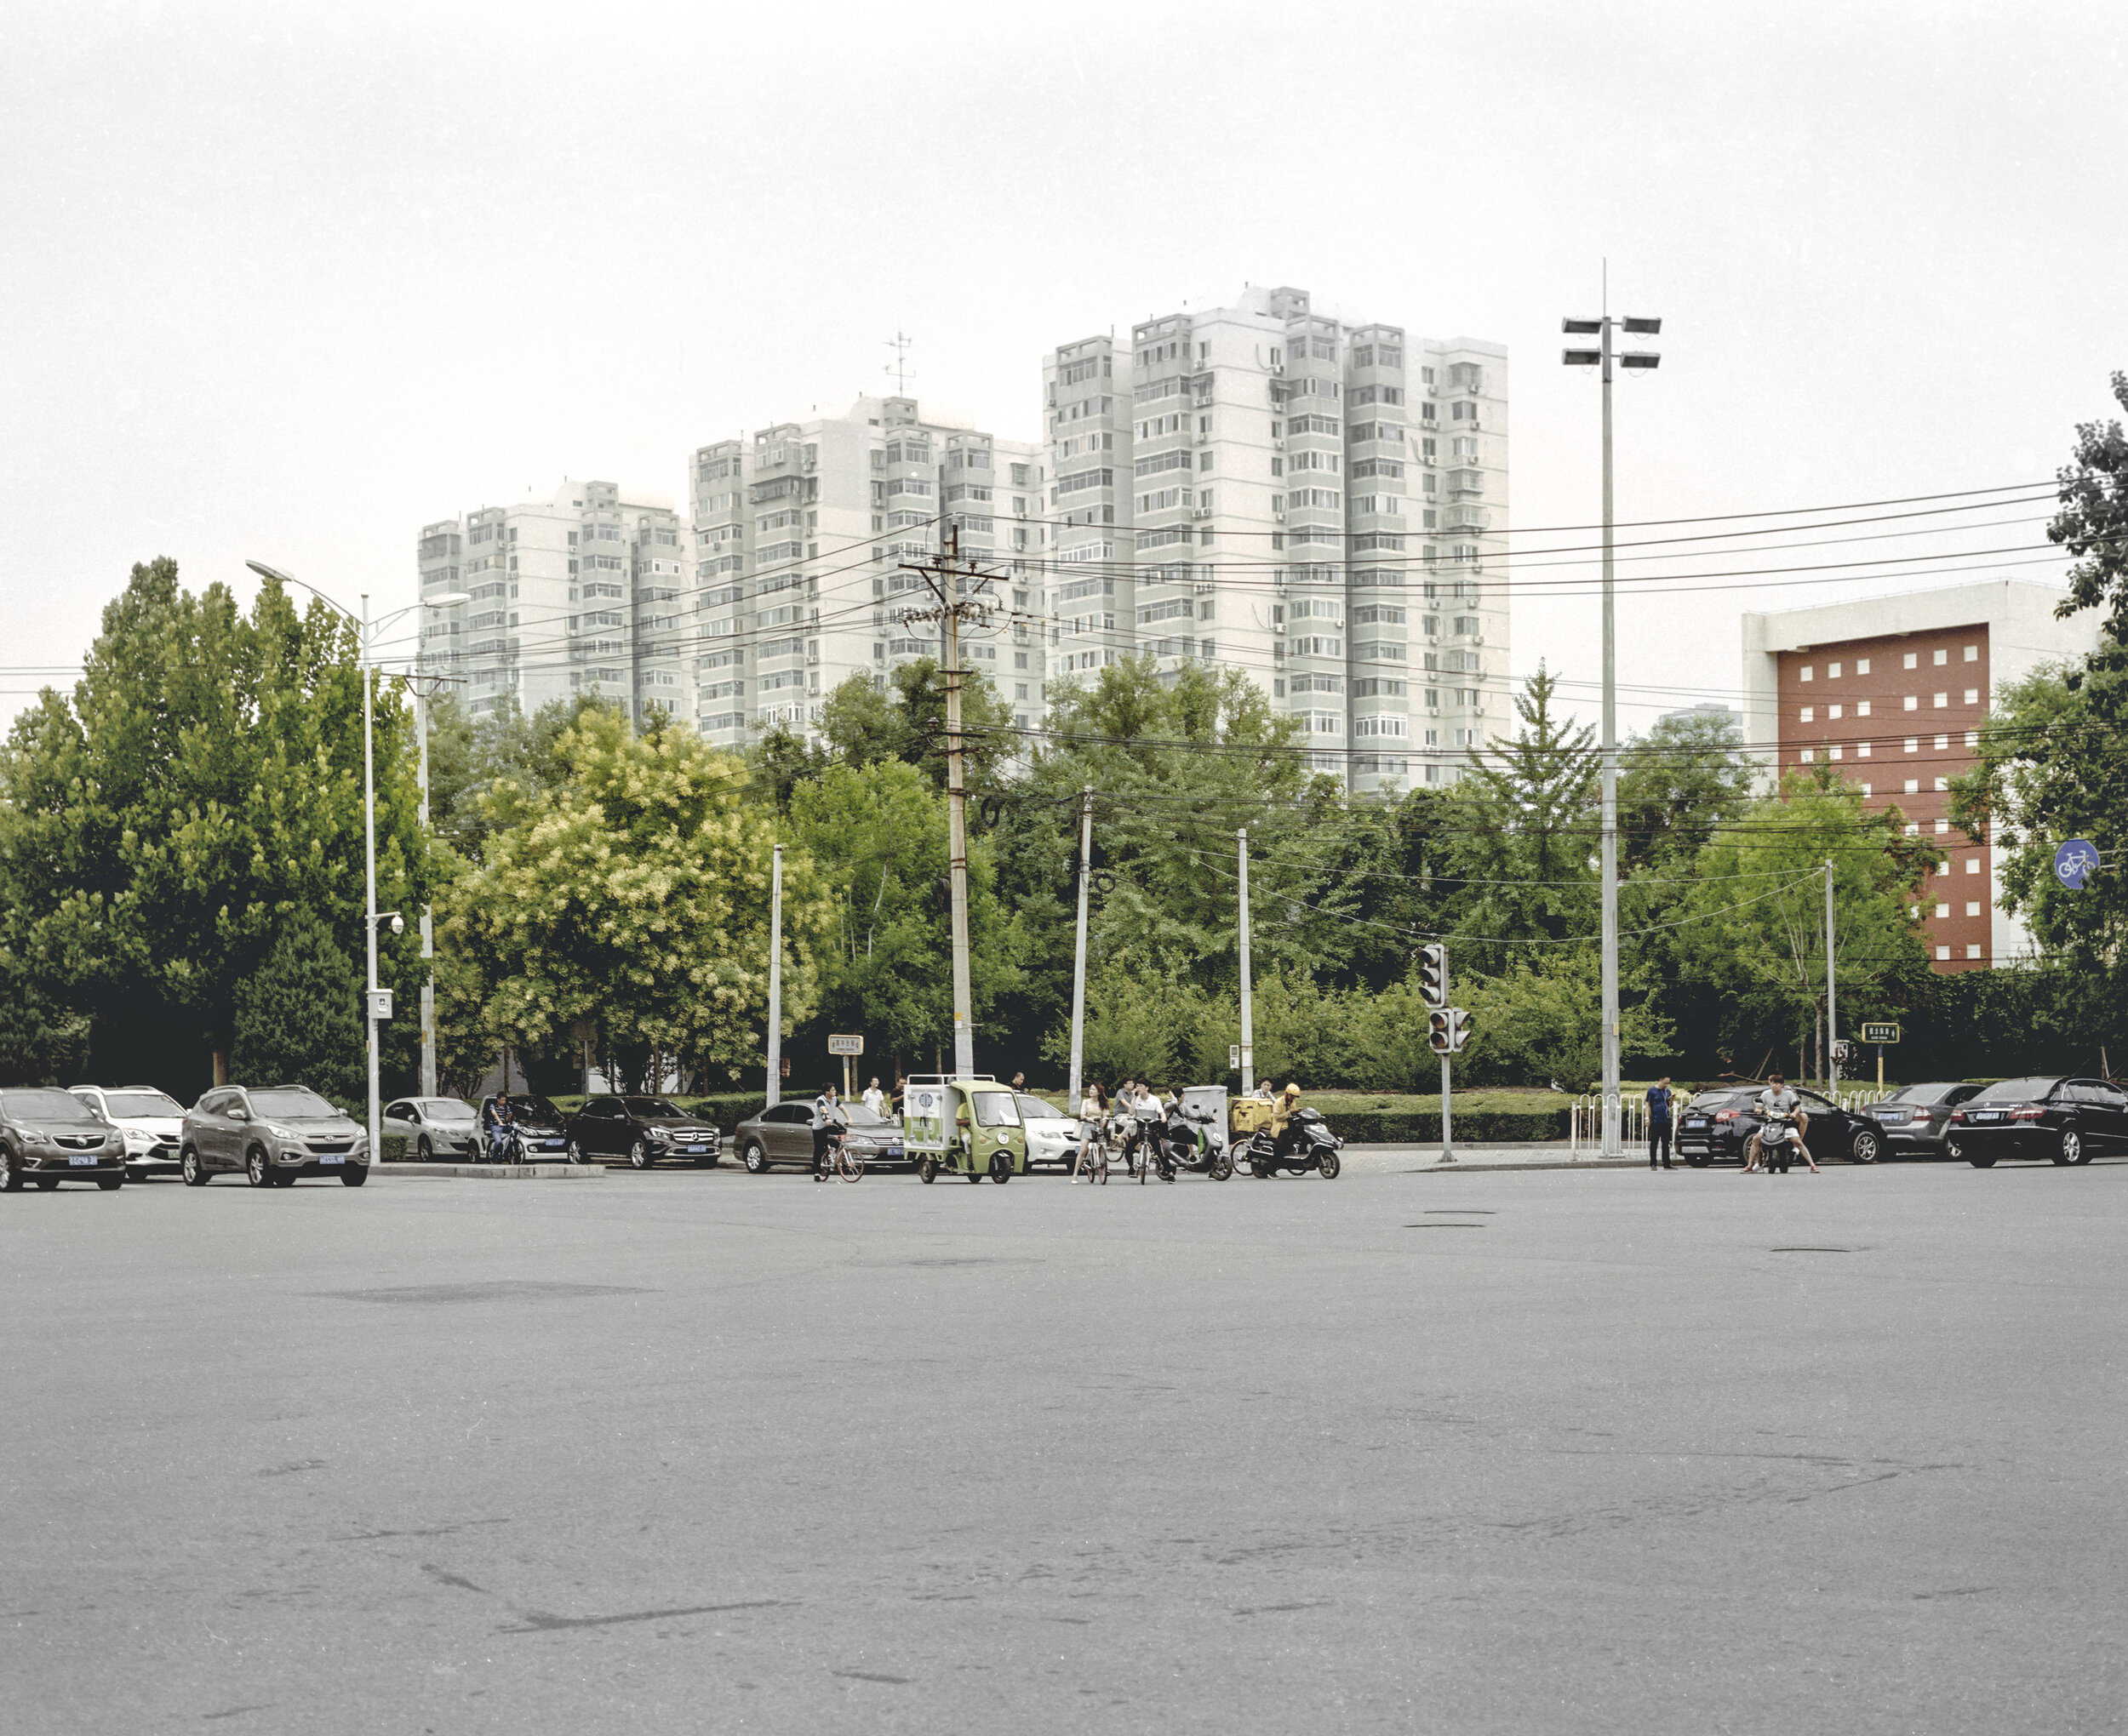  Huguang Middle Street and Nanhu North Road,   Beijing, July 2018 